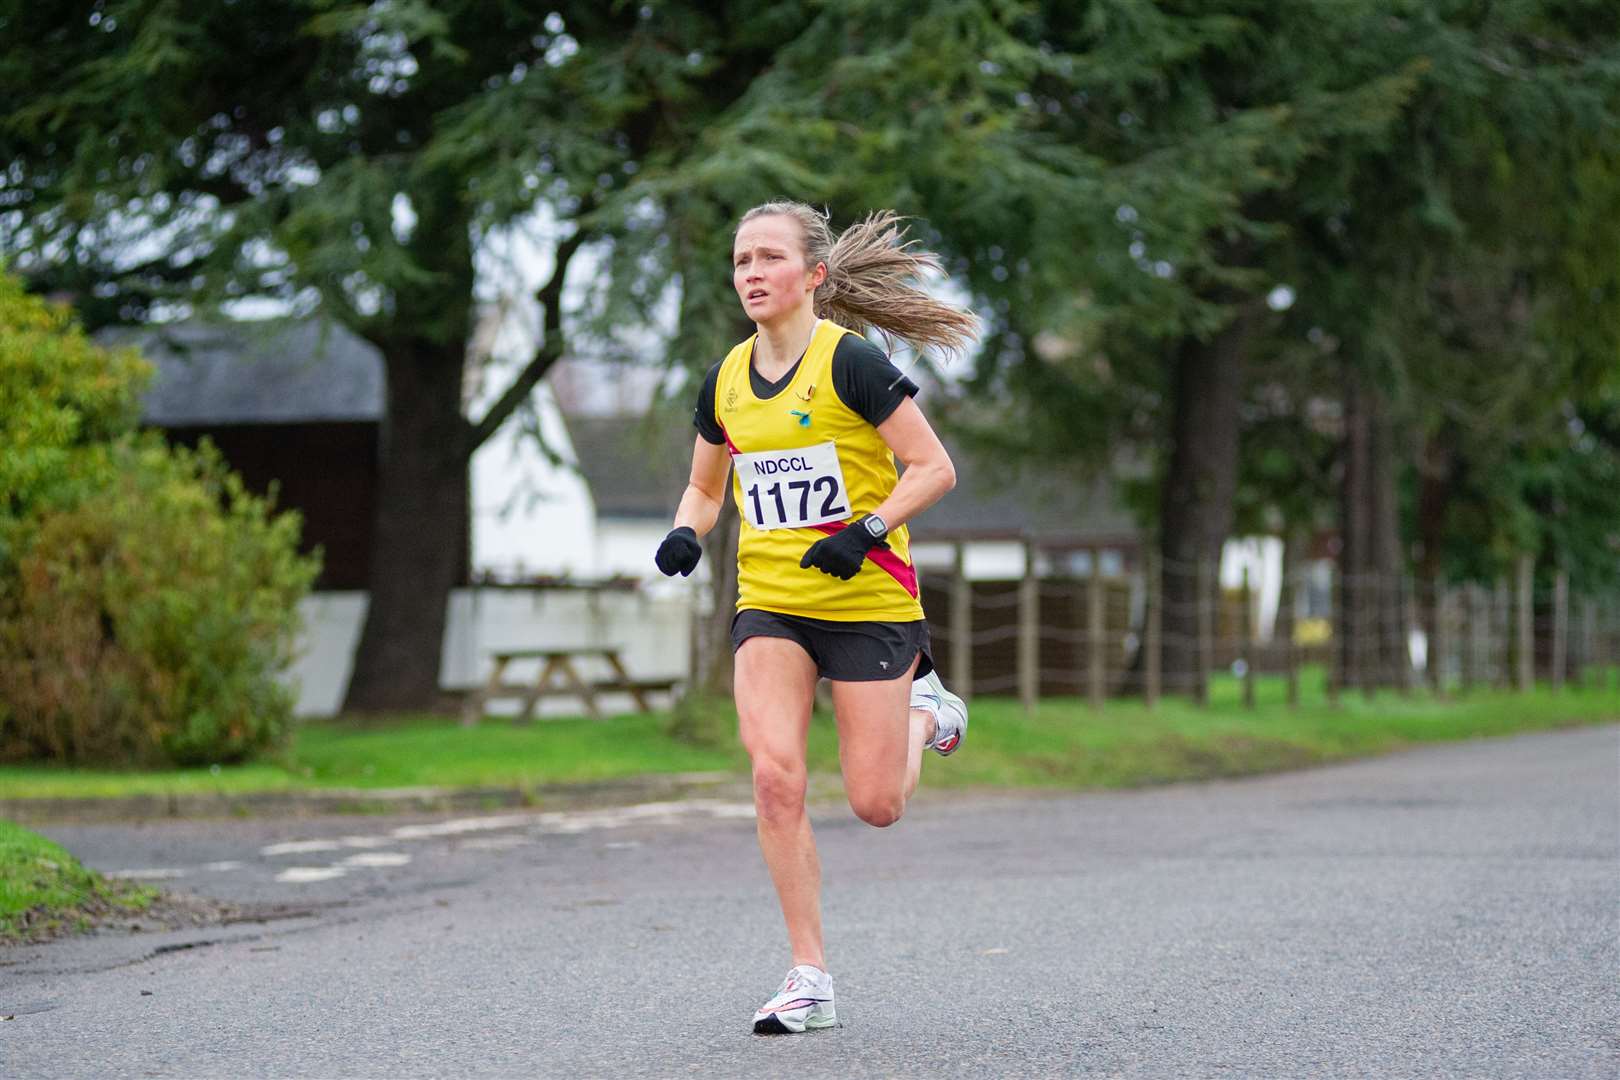 1st Female runner and 22nd overall - Inverness Harrier Jenny Bannerman (#1172) finished the race in a time of 35:08...The 'Back to Basics' 10k race, held on the back roads to the north of Forres. ..Picture: Daniel Forsyth..